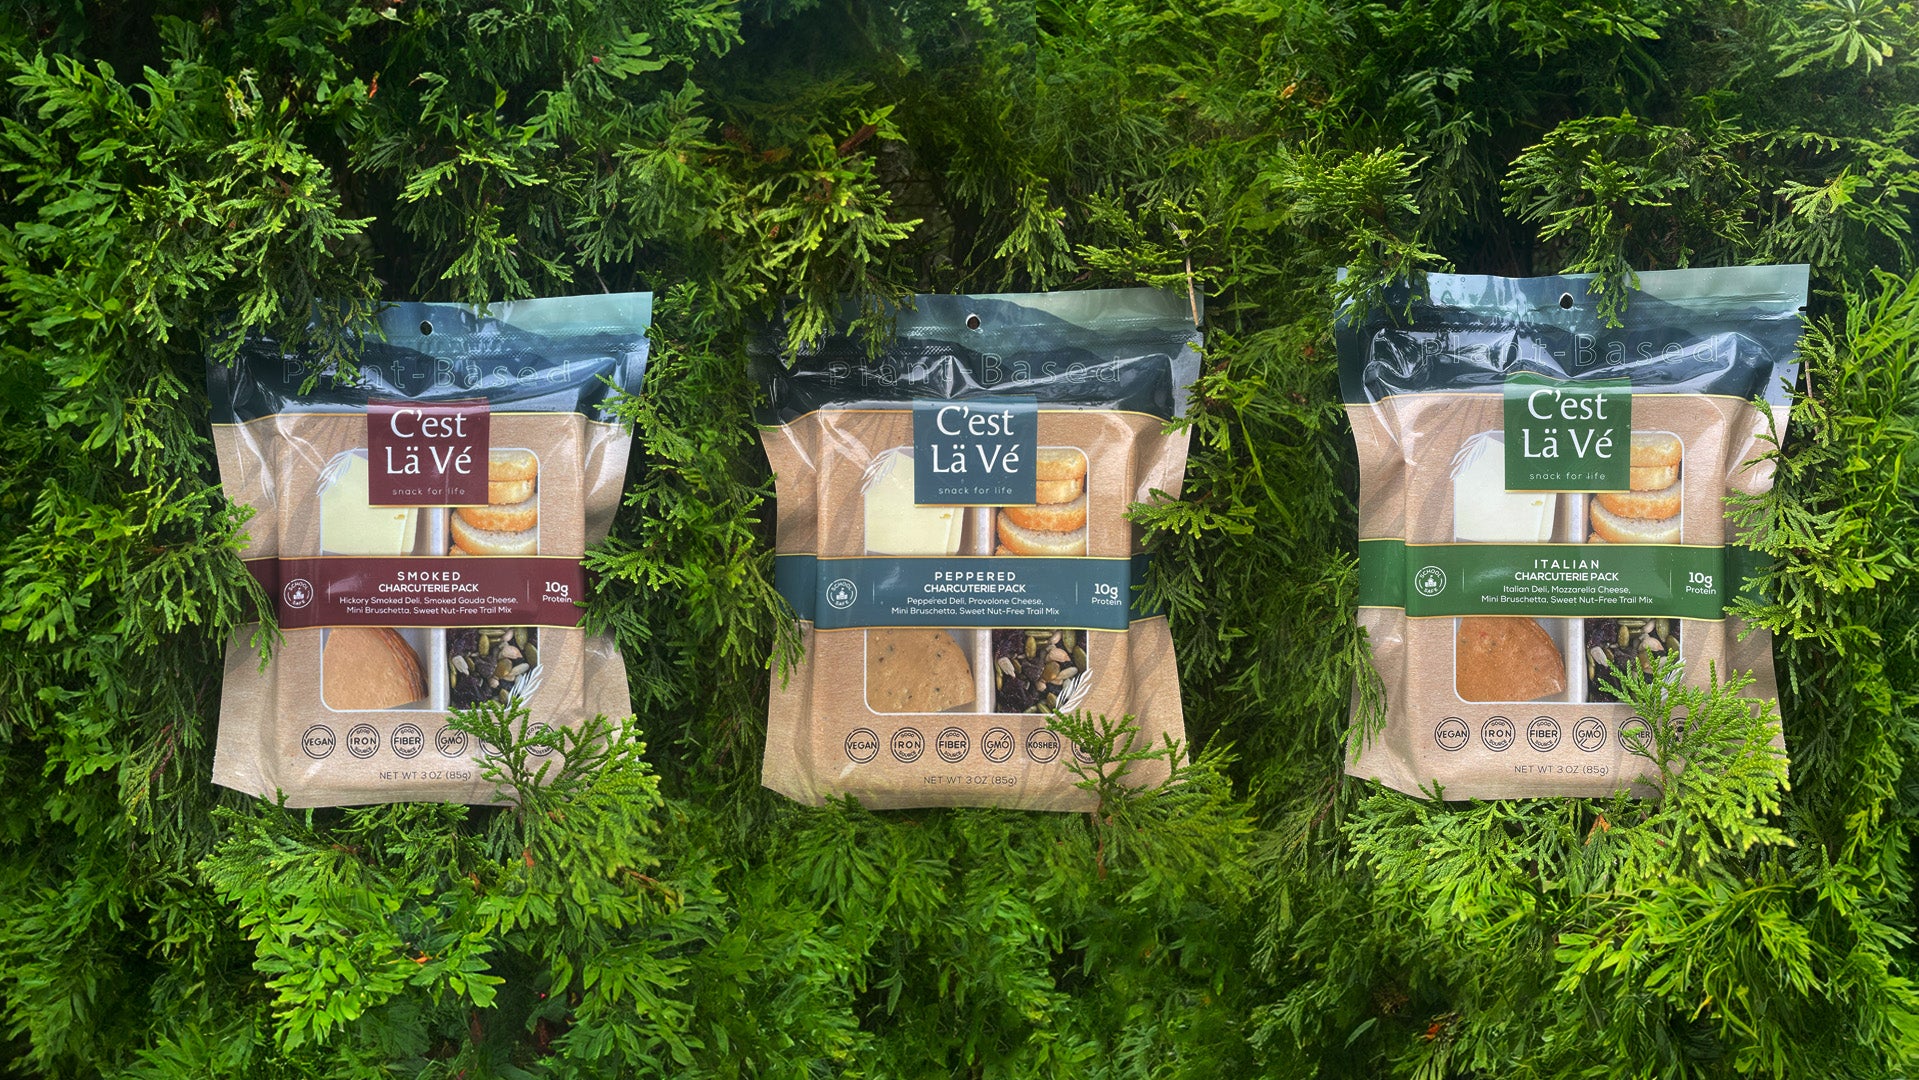 C'est La Vé Variety Charcuterie Luncherie Snacks: Including our Italian, Smoked, and Peppered Luncheries - A delicious, healthy, and sustainable snack packed with high protein and plant-based ingredients.